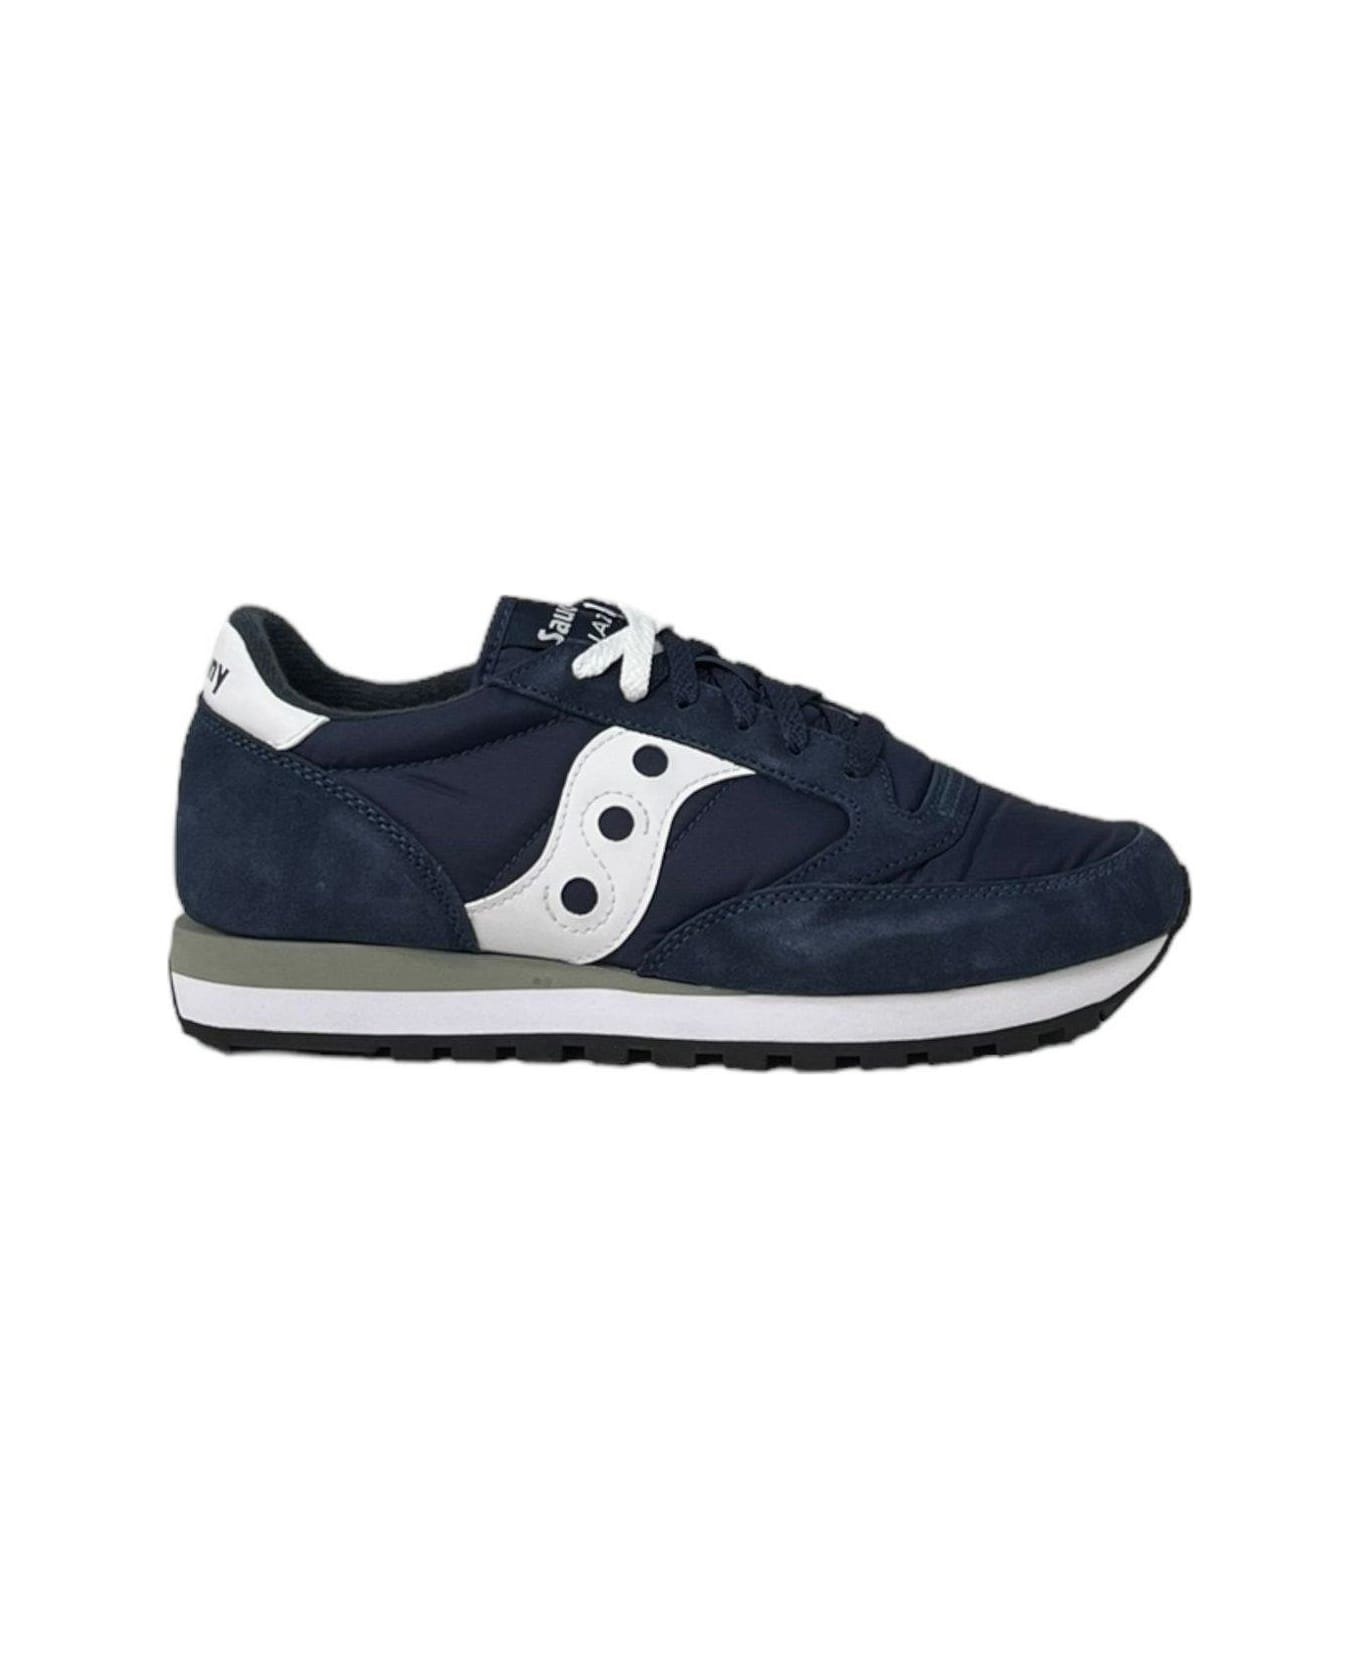 Saucony Jazz Original Lace-up Sneakers - Navy/white スニーカー